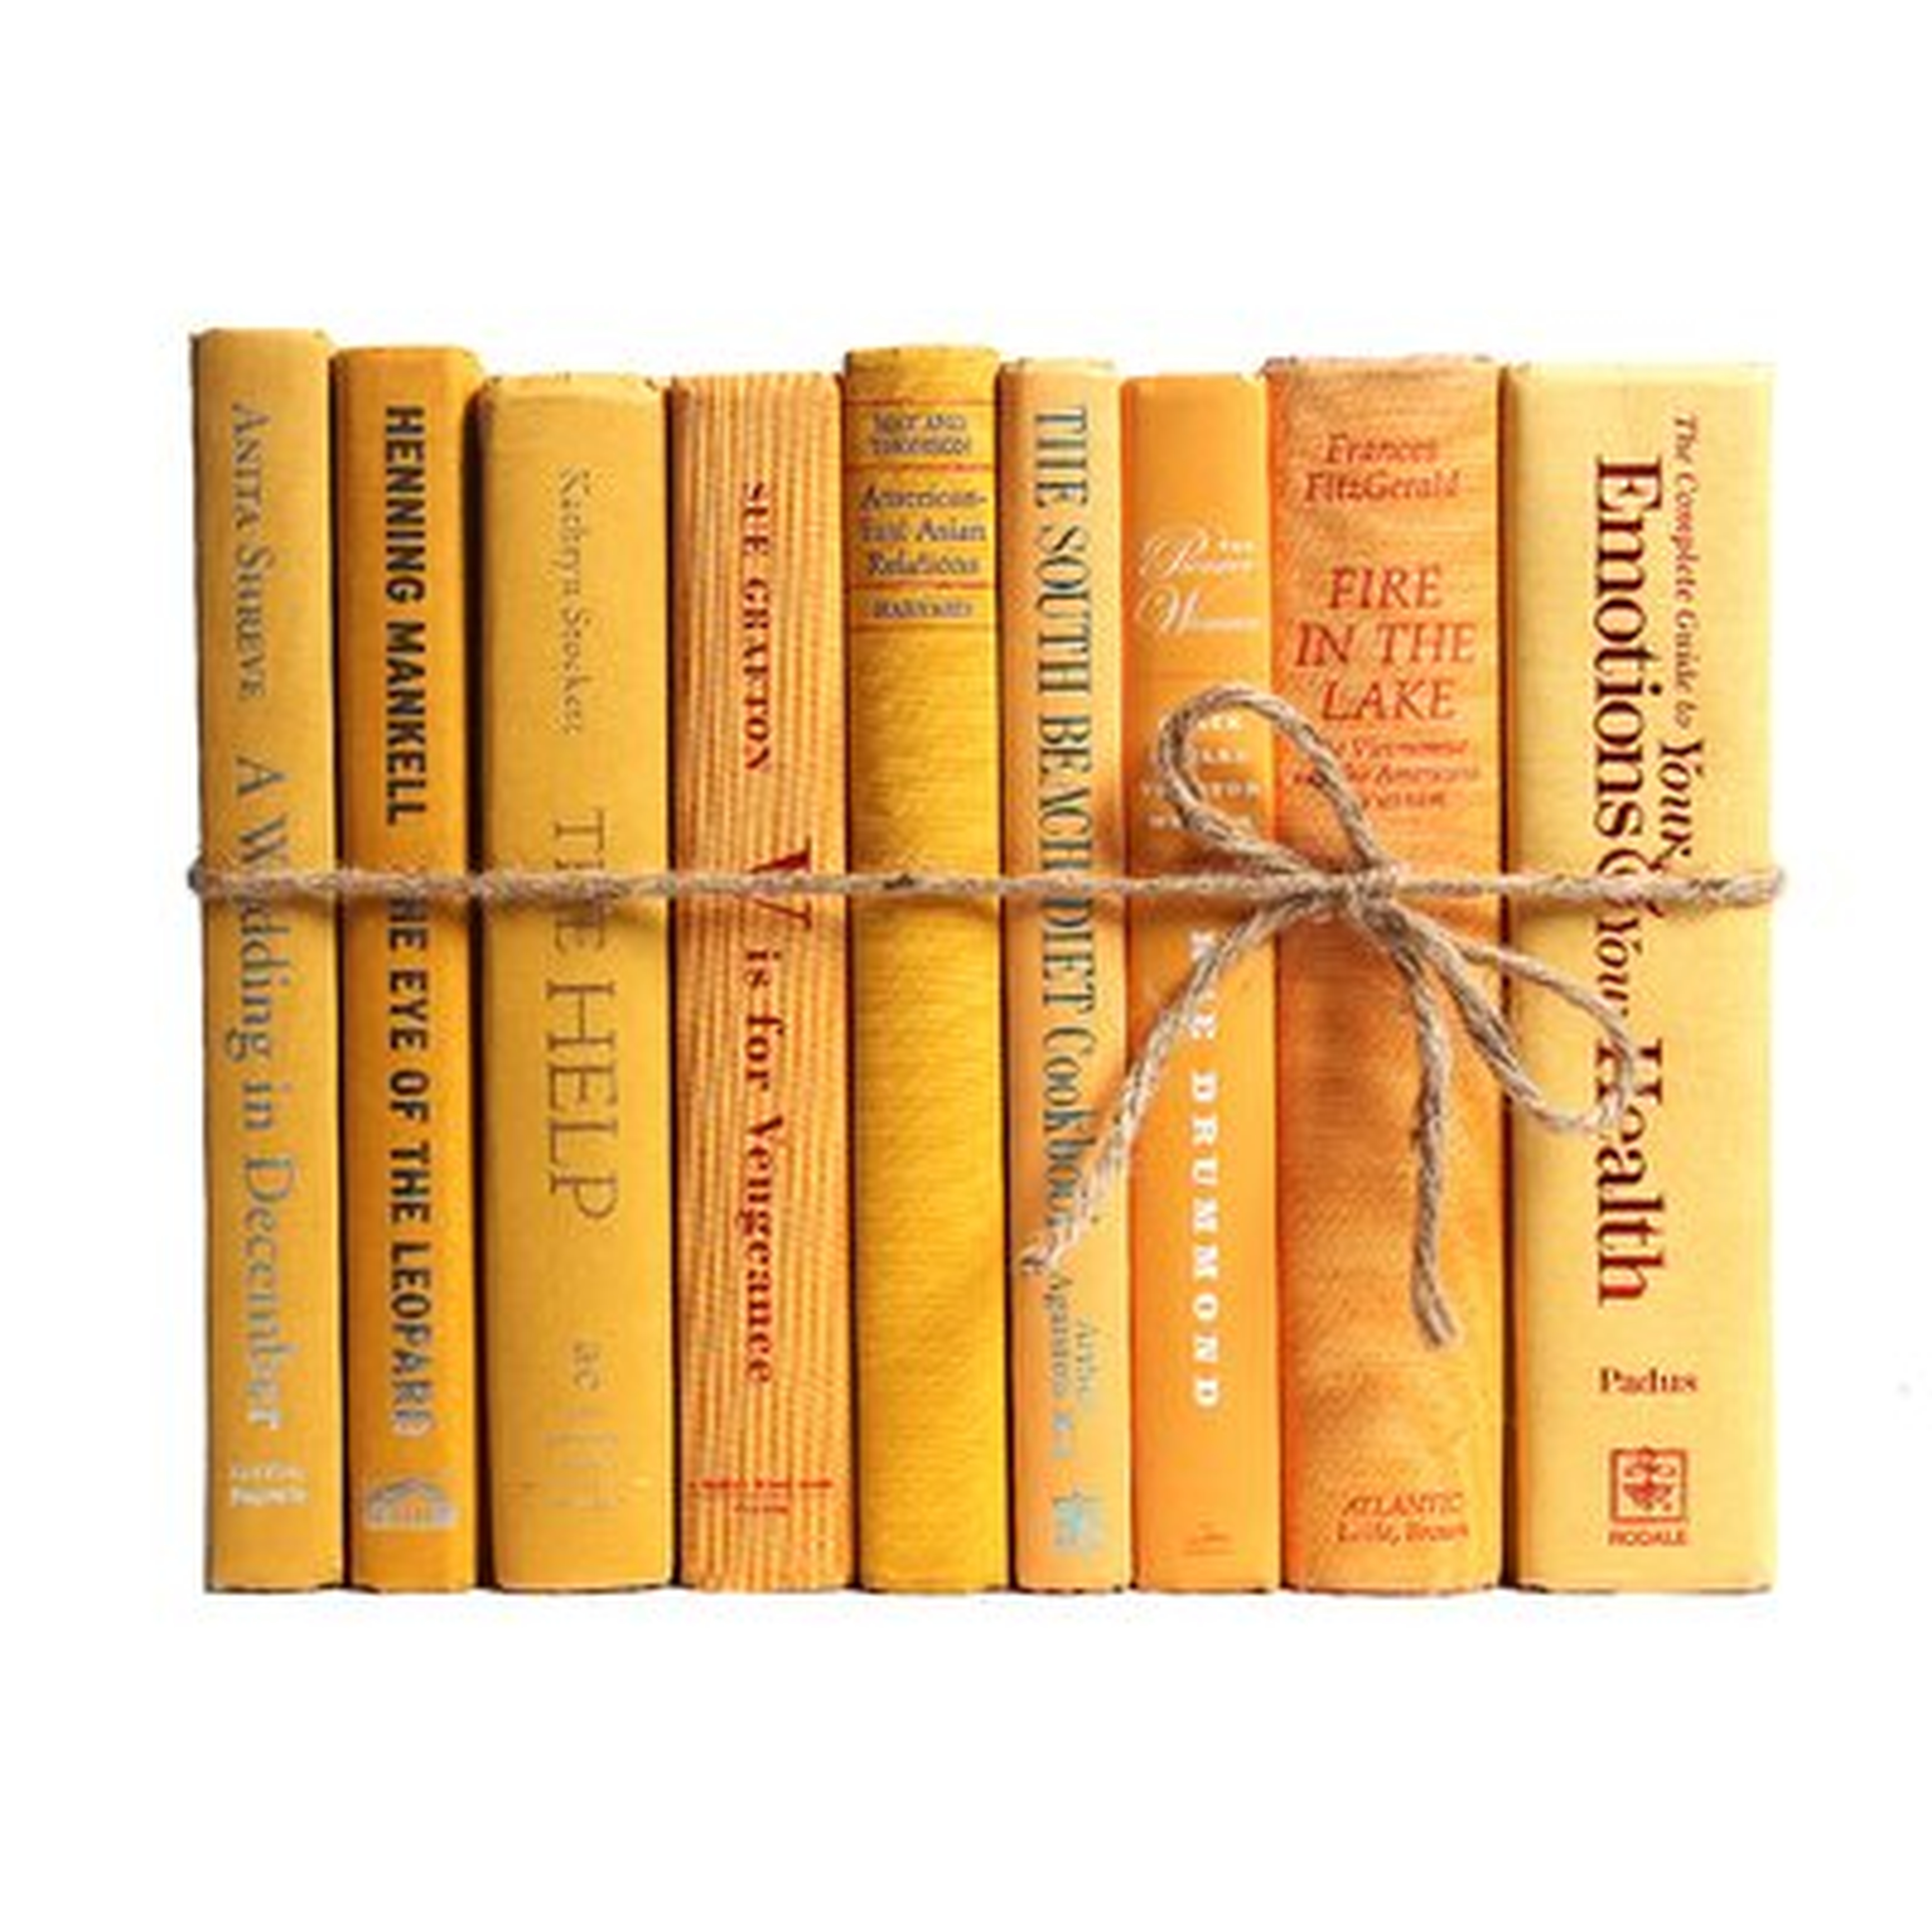 Authentic Decorative Books - By Color Modern Daffodil ColorPak (1 Linear Foot, 10-12 Books) - Birch Lane